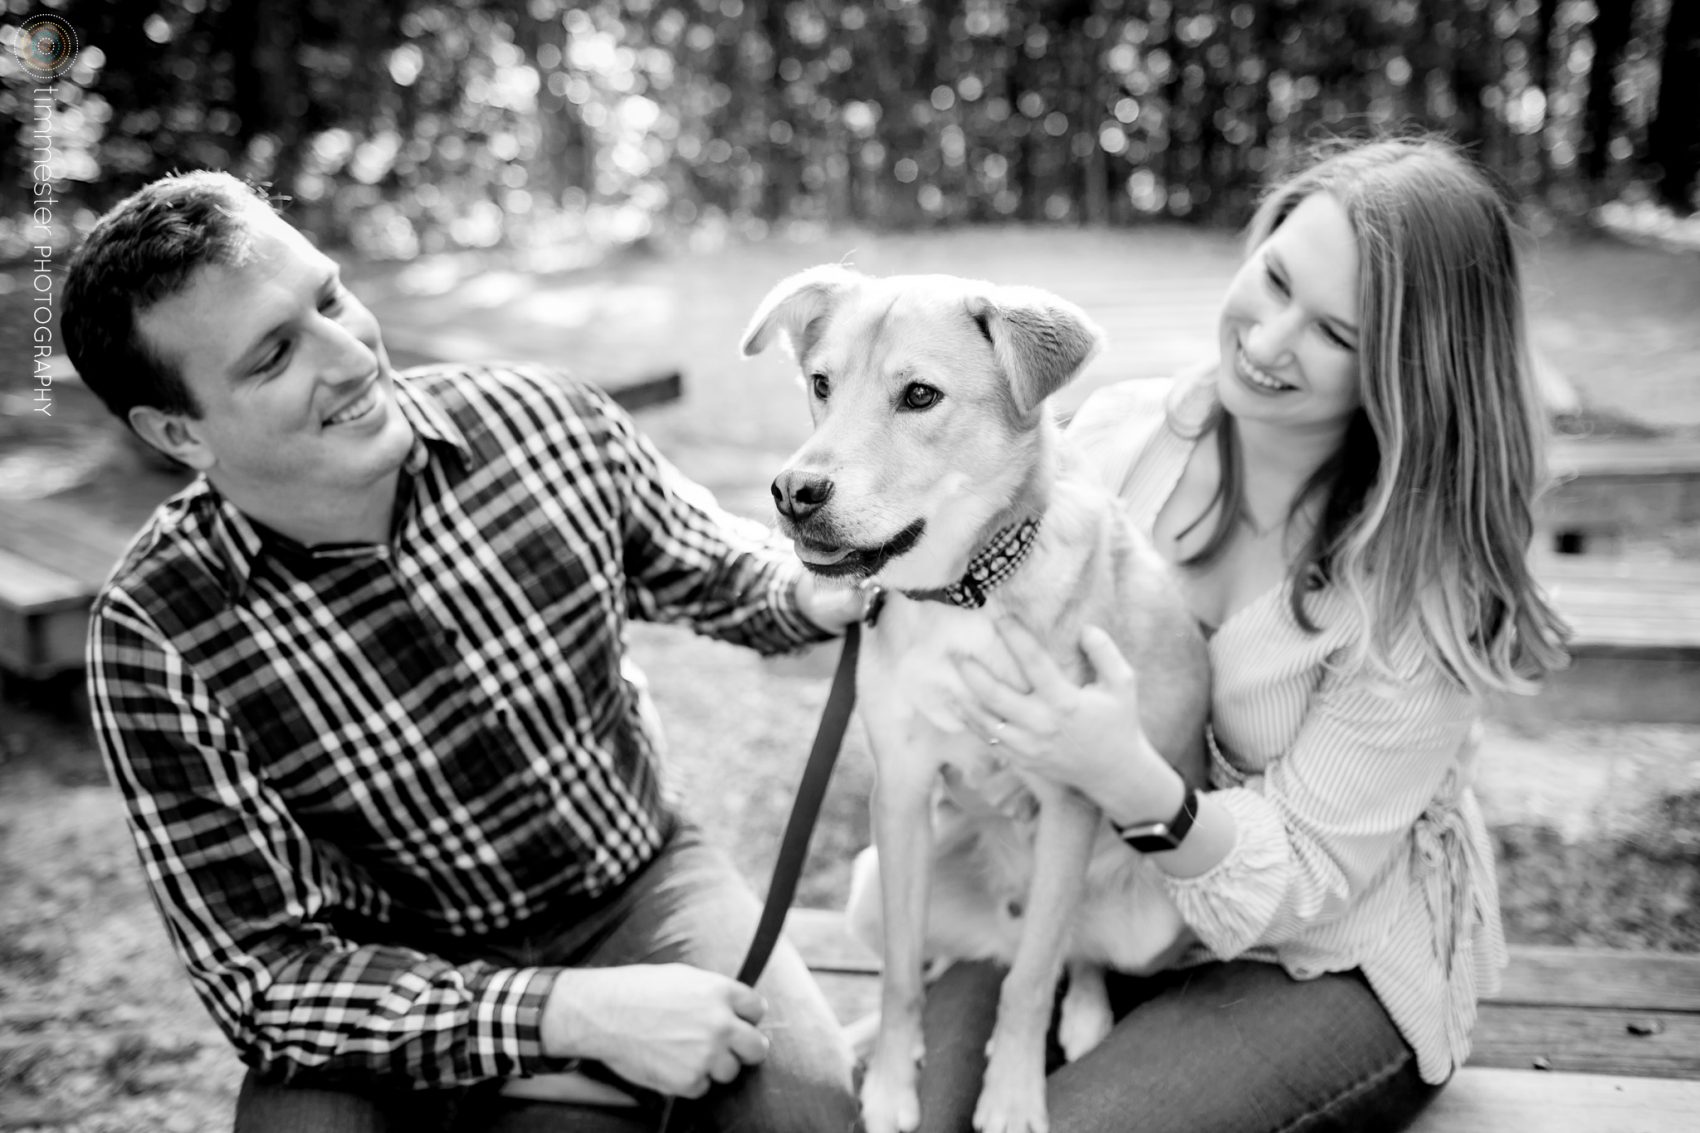 An engagement session with a puppy at Umstead Park in North Carolina.